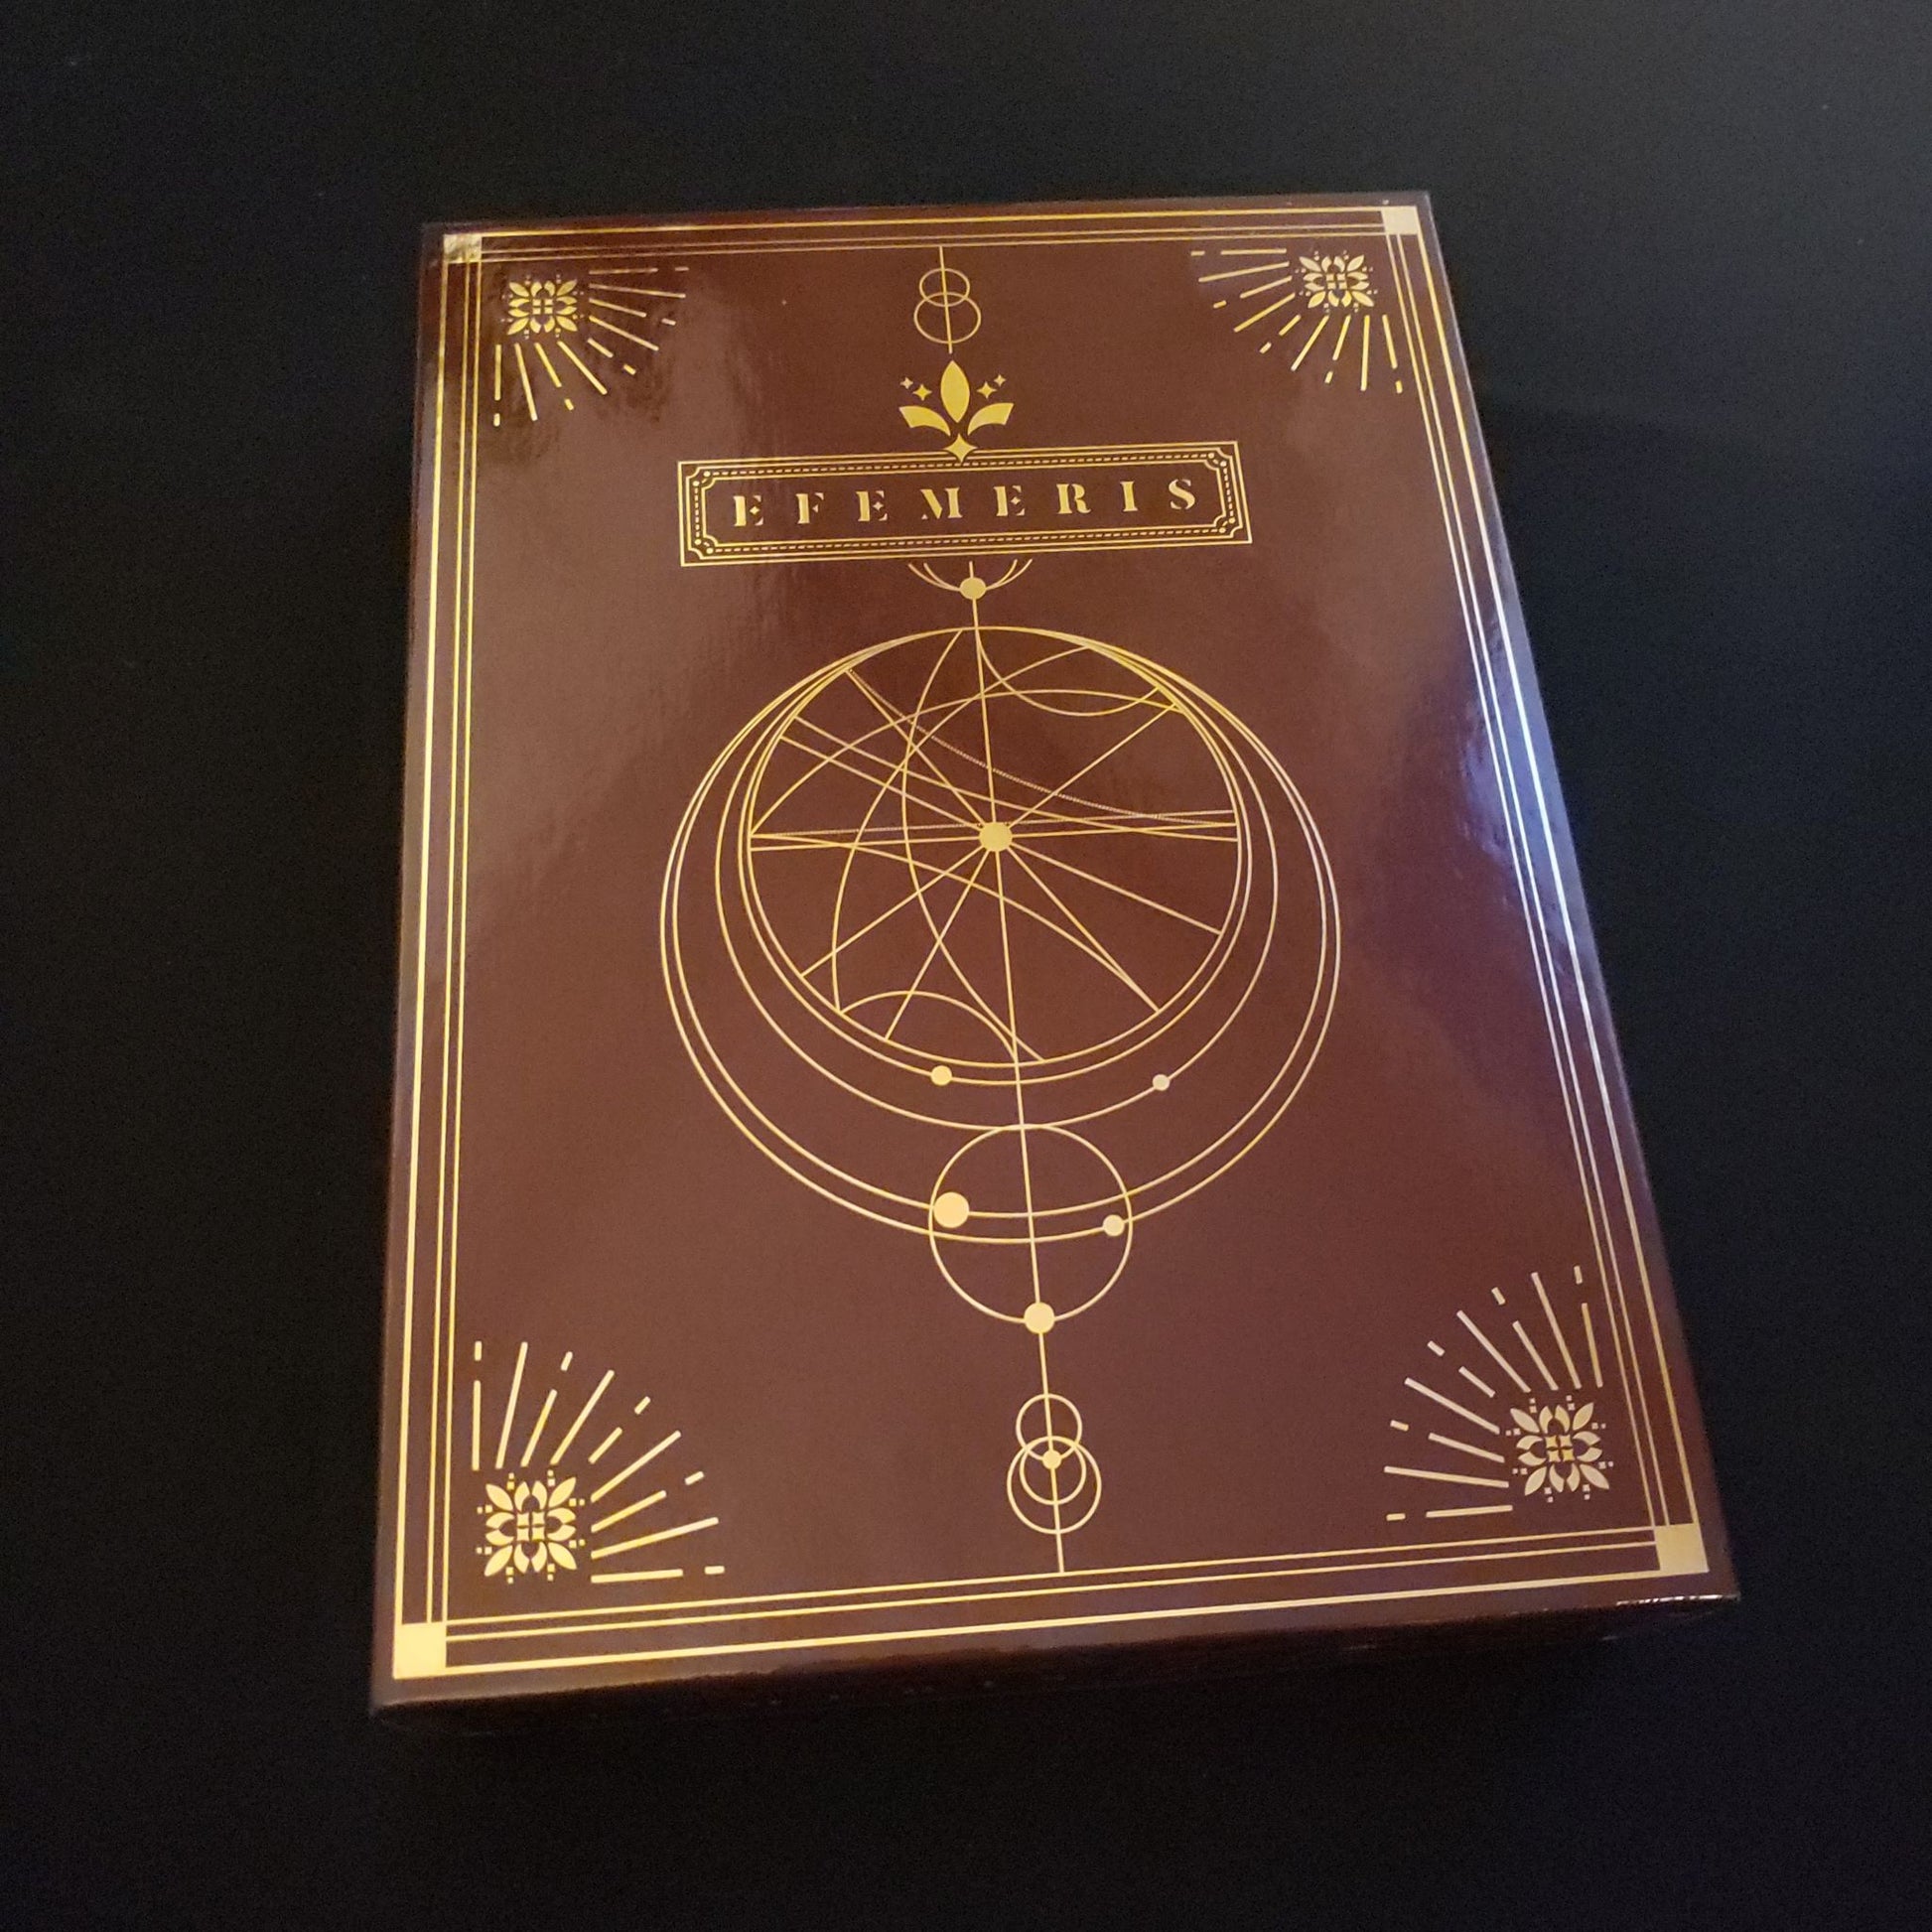 Efemeris board game - front cover of box